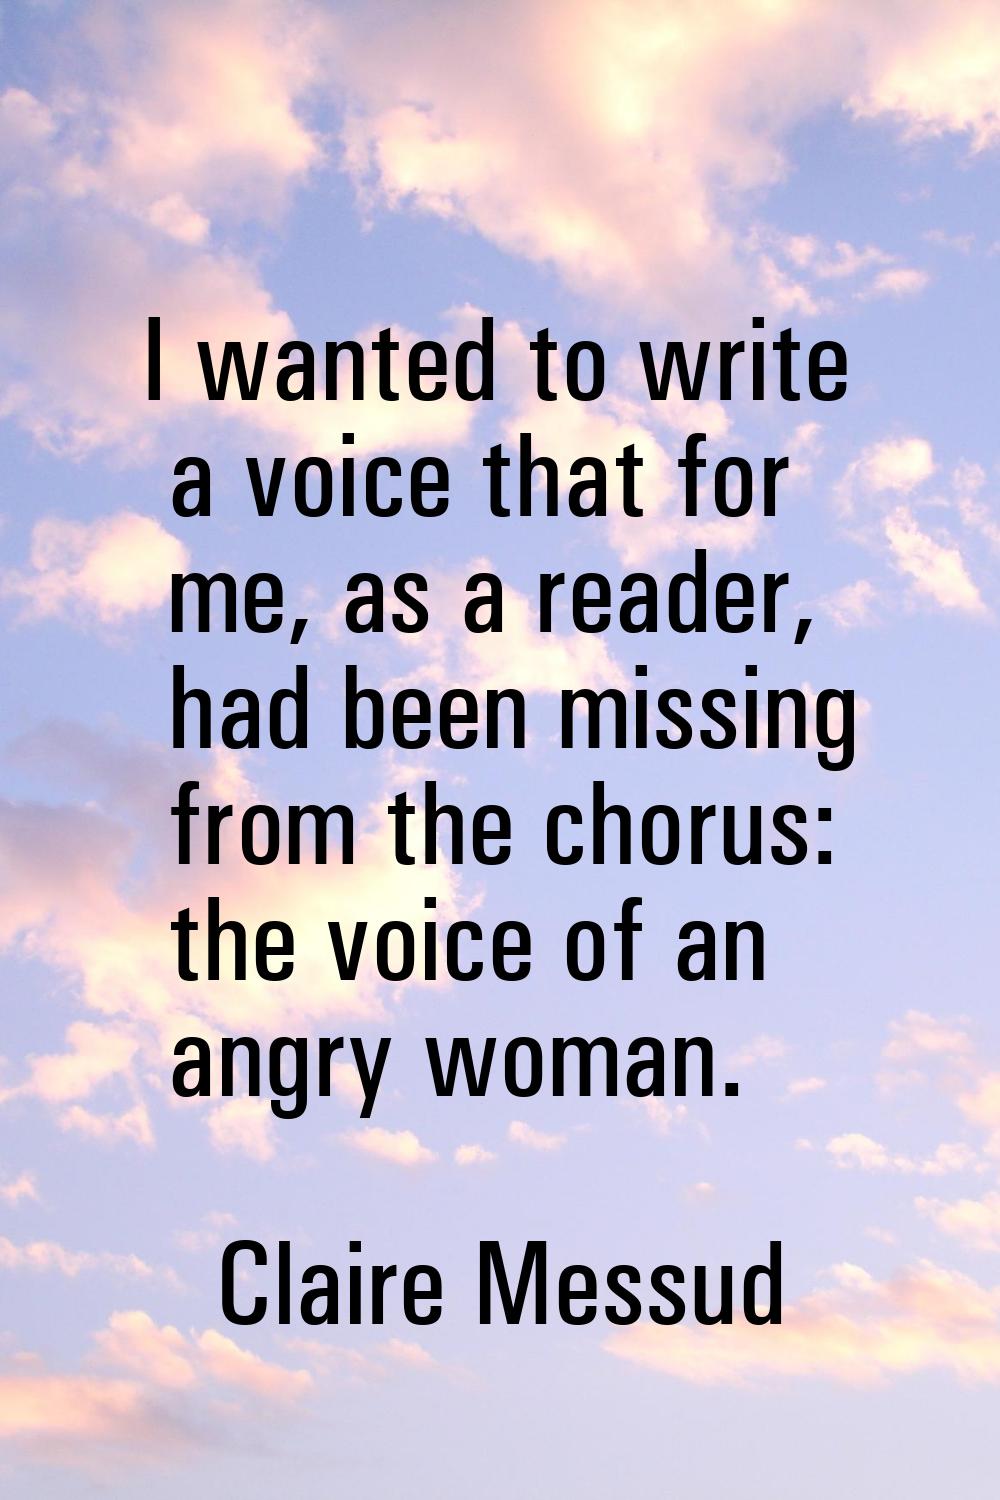 I wanted to write a voice that for me, as a reader, had been missing from the chorus: the voice of 